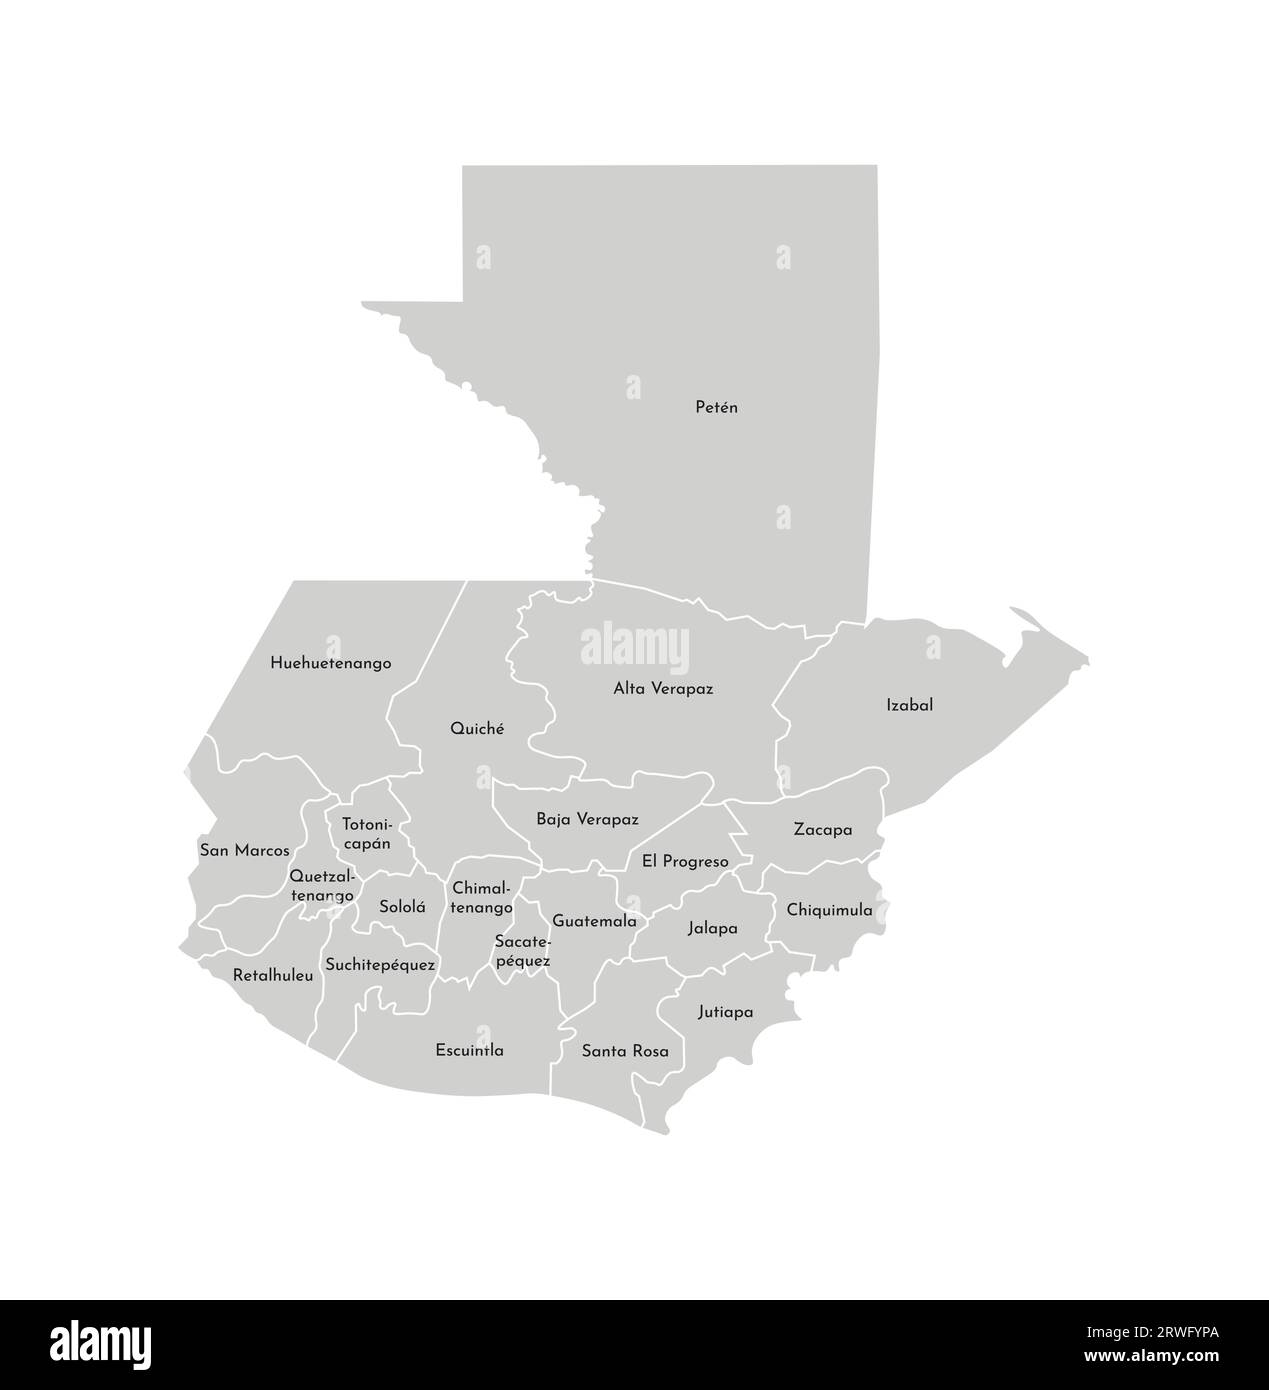 Vector isolated illustration of simplified administrative map of Guatemala. Borders and names of the departments (regions). Grey silhouettes. White ou Stock Vector